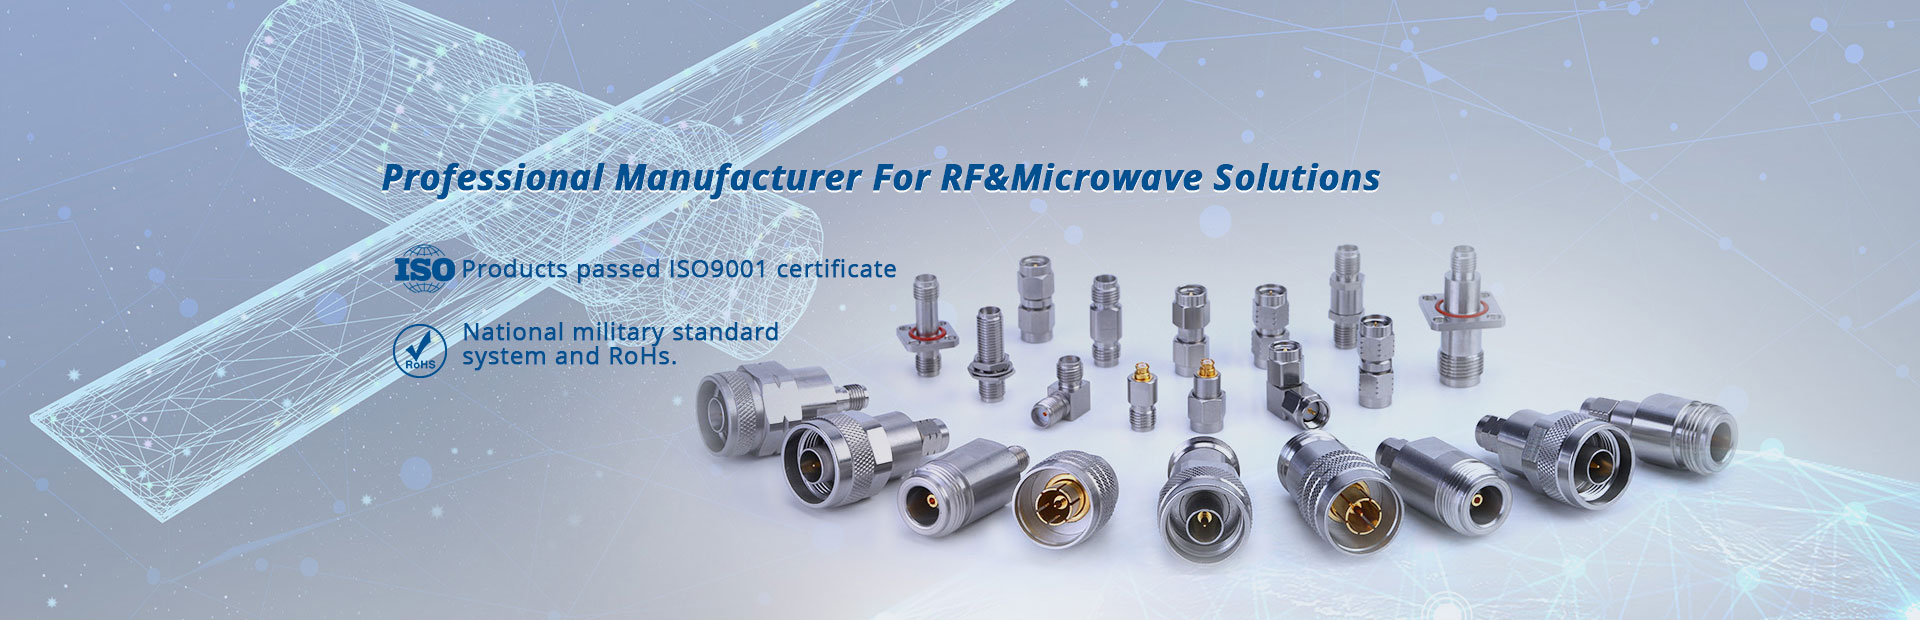 Professional Manufacturer For RF&Microwave Solutions